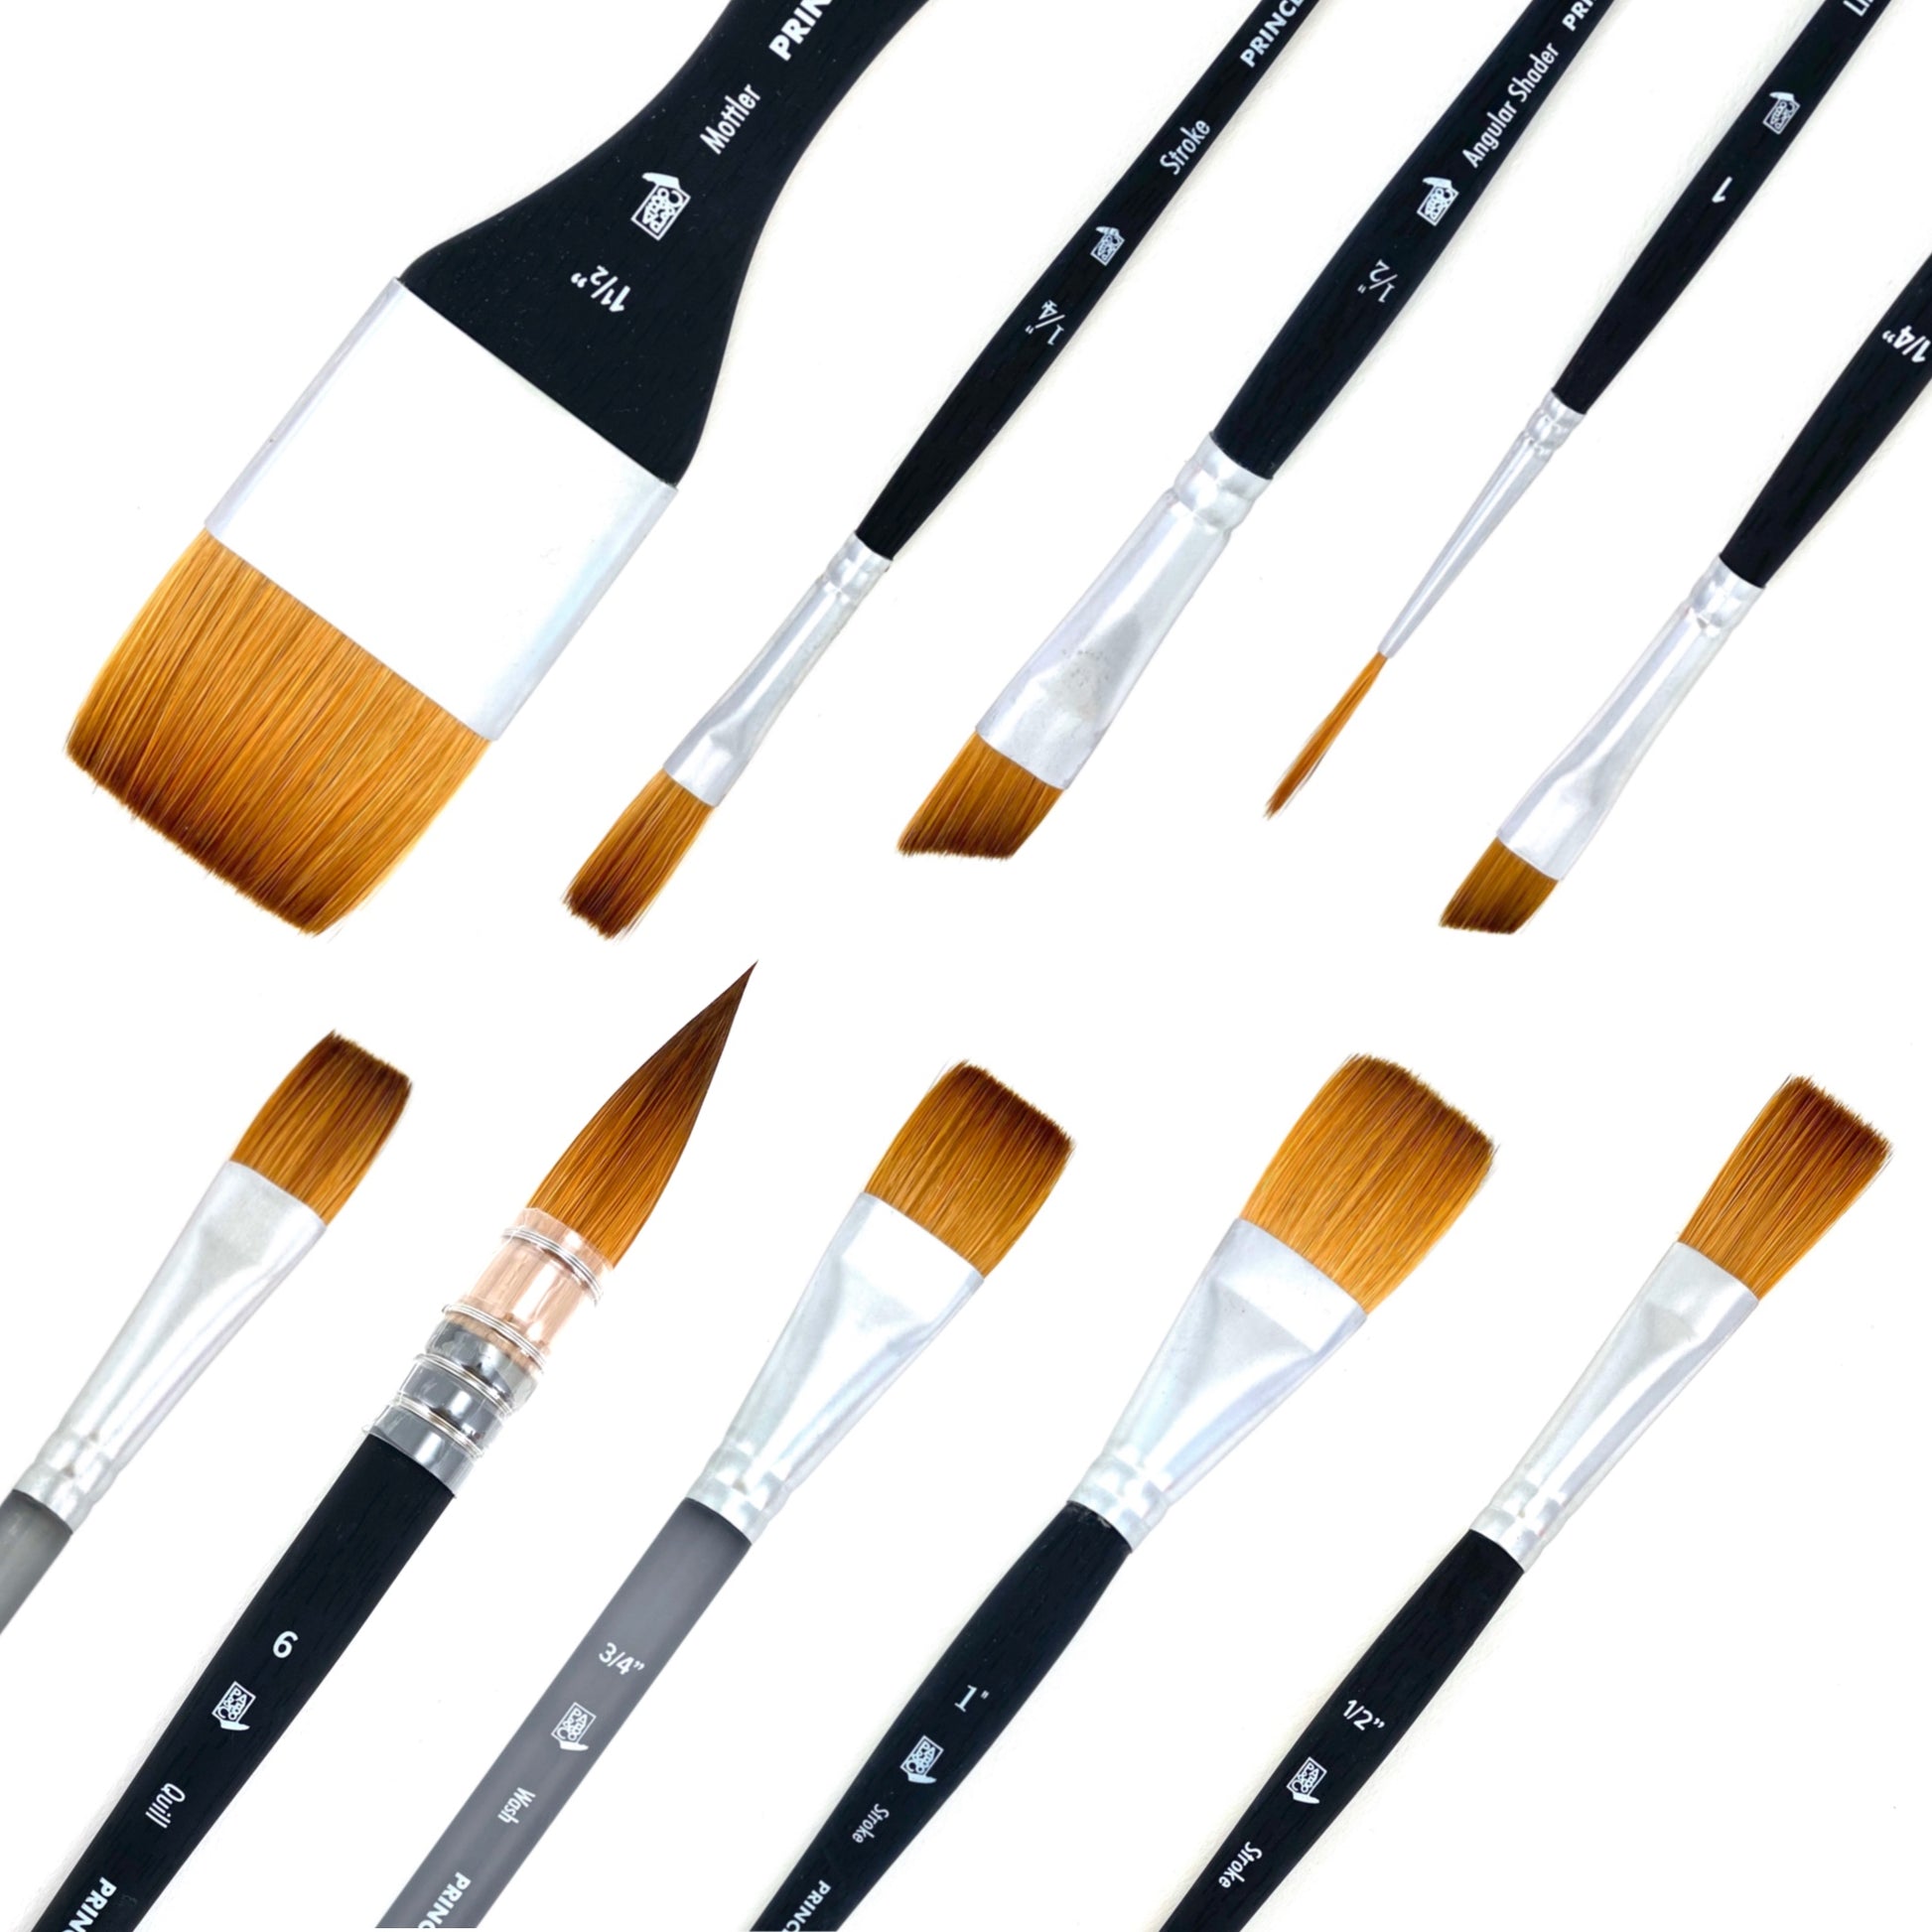 Princeton Velvetouch Brushes - Choose Your Brush - Page 2 of 2